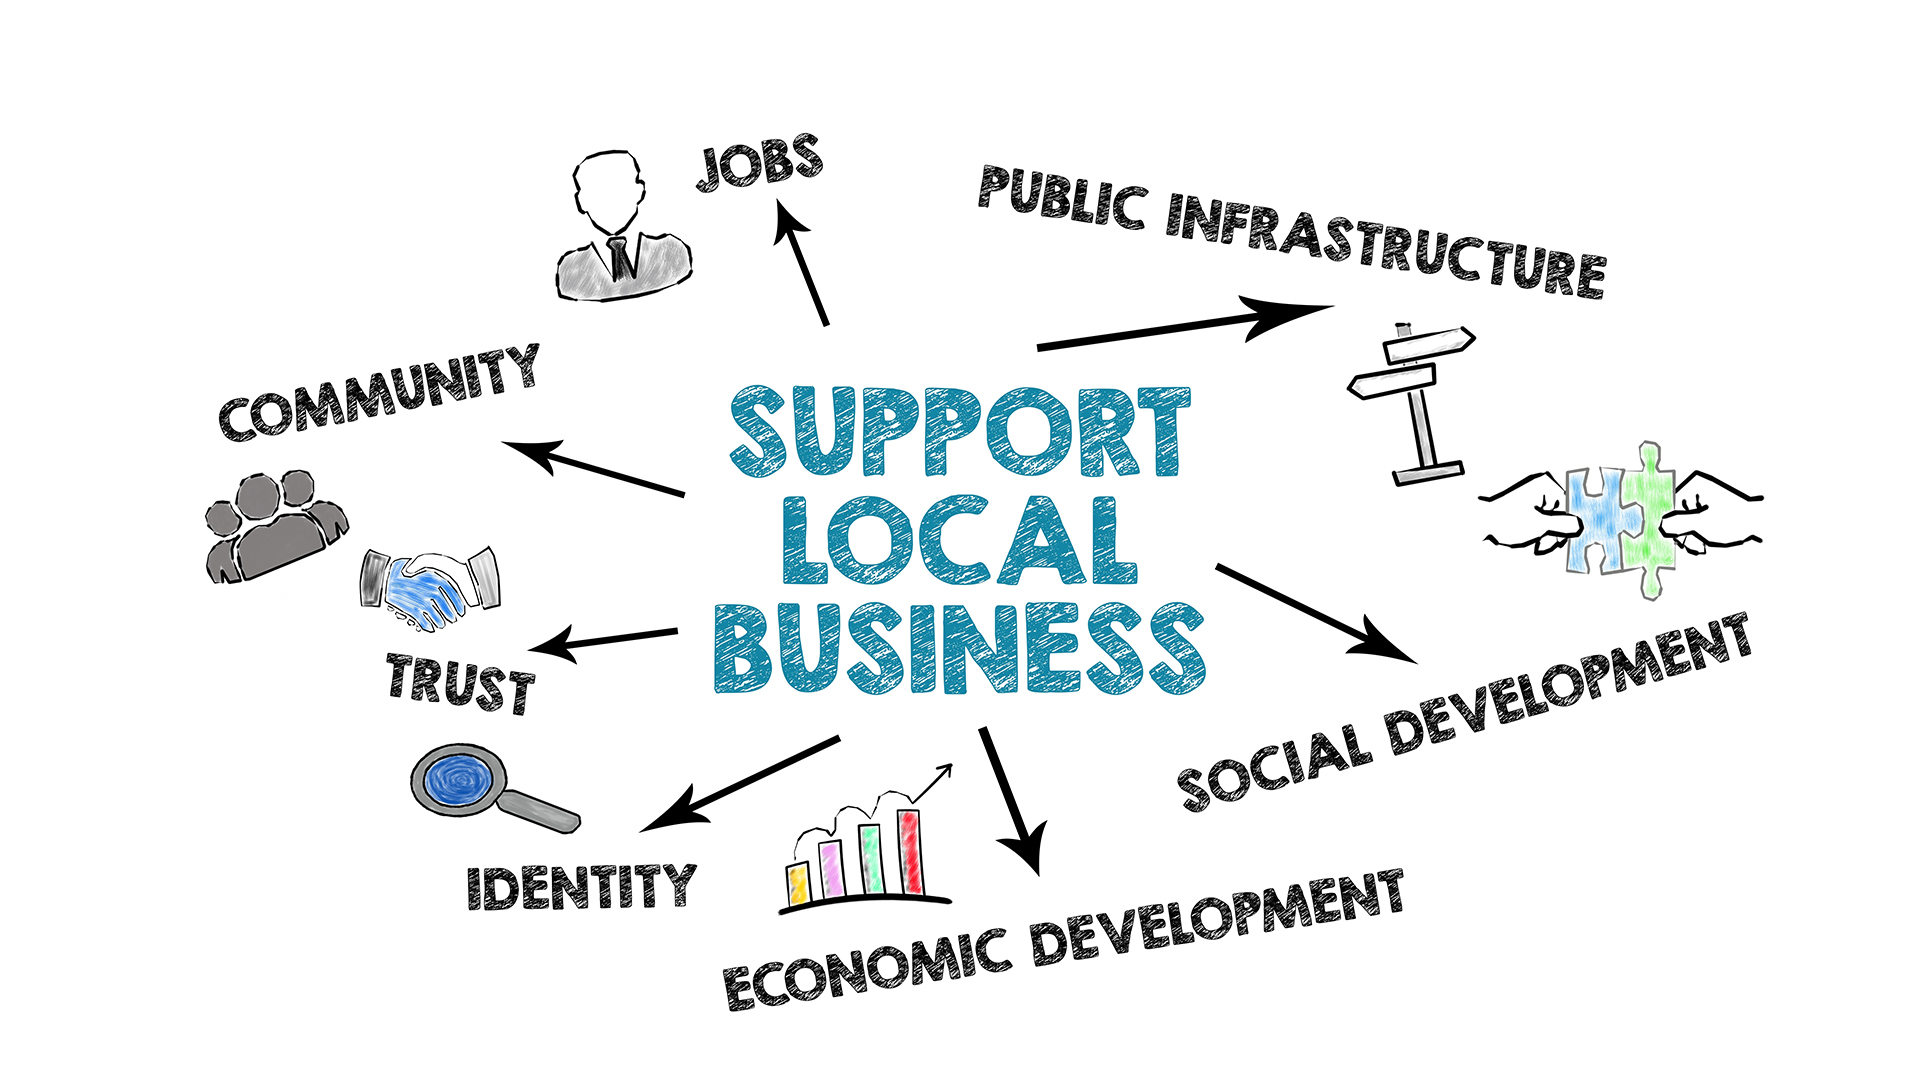 Reasons to support local businesses